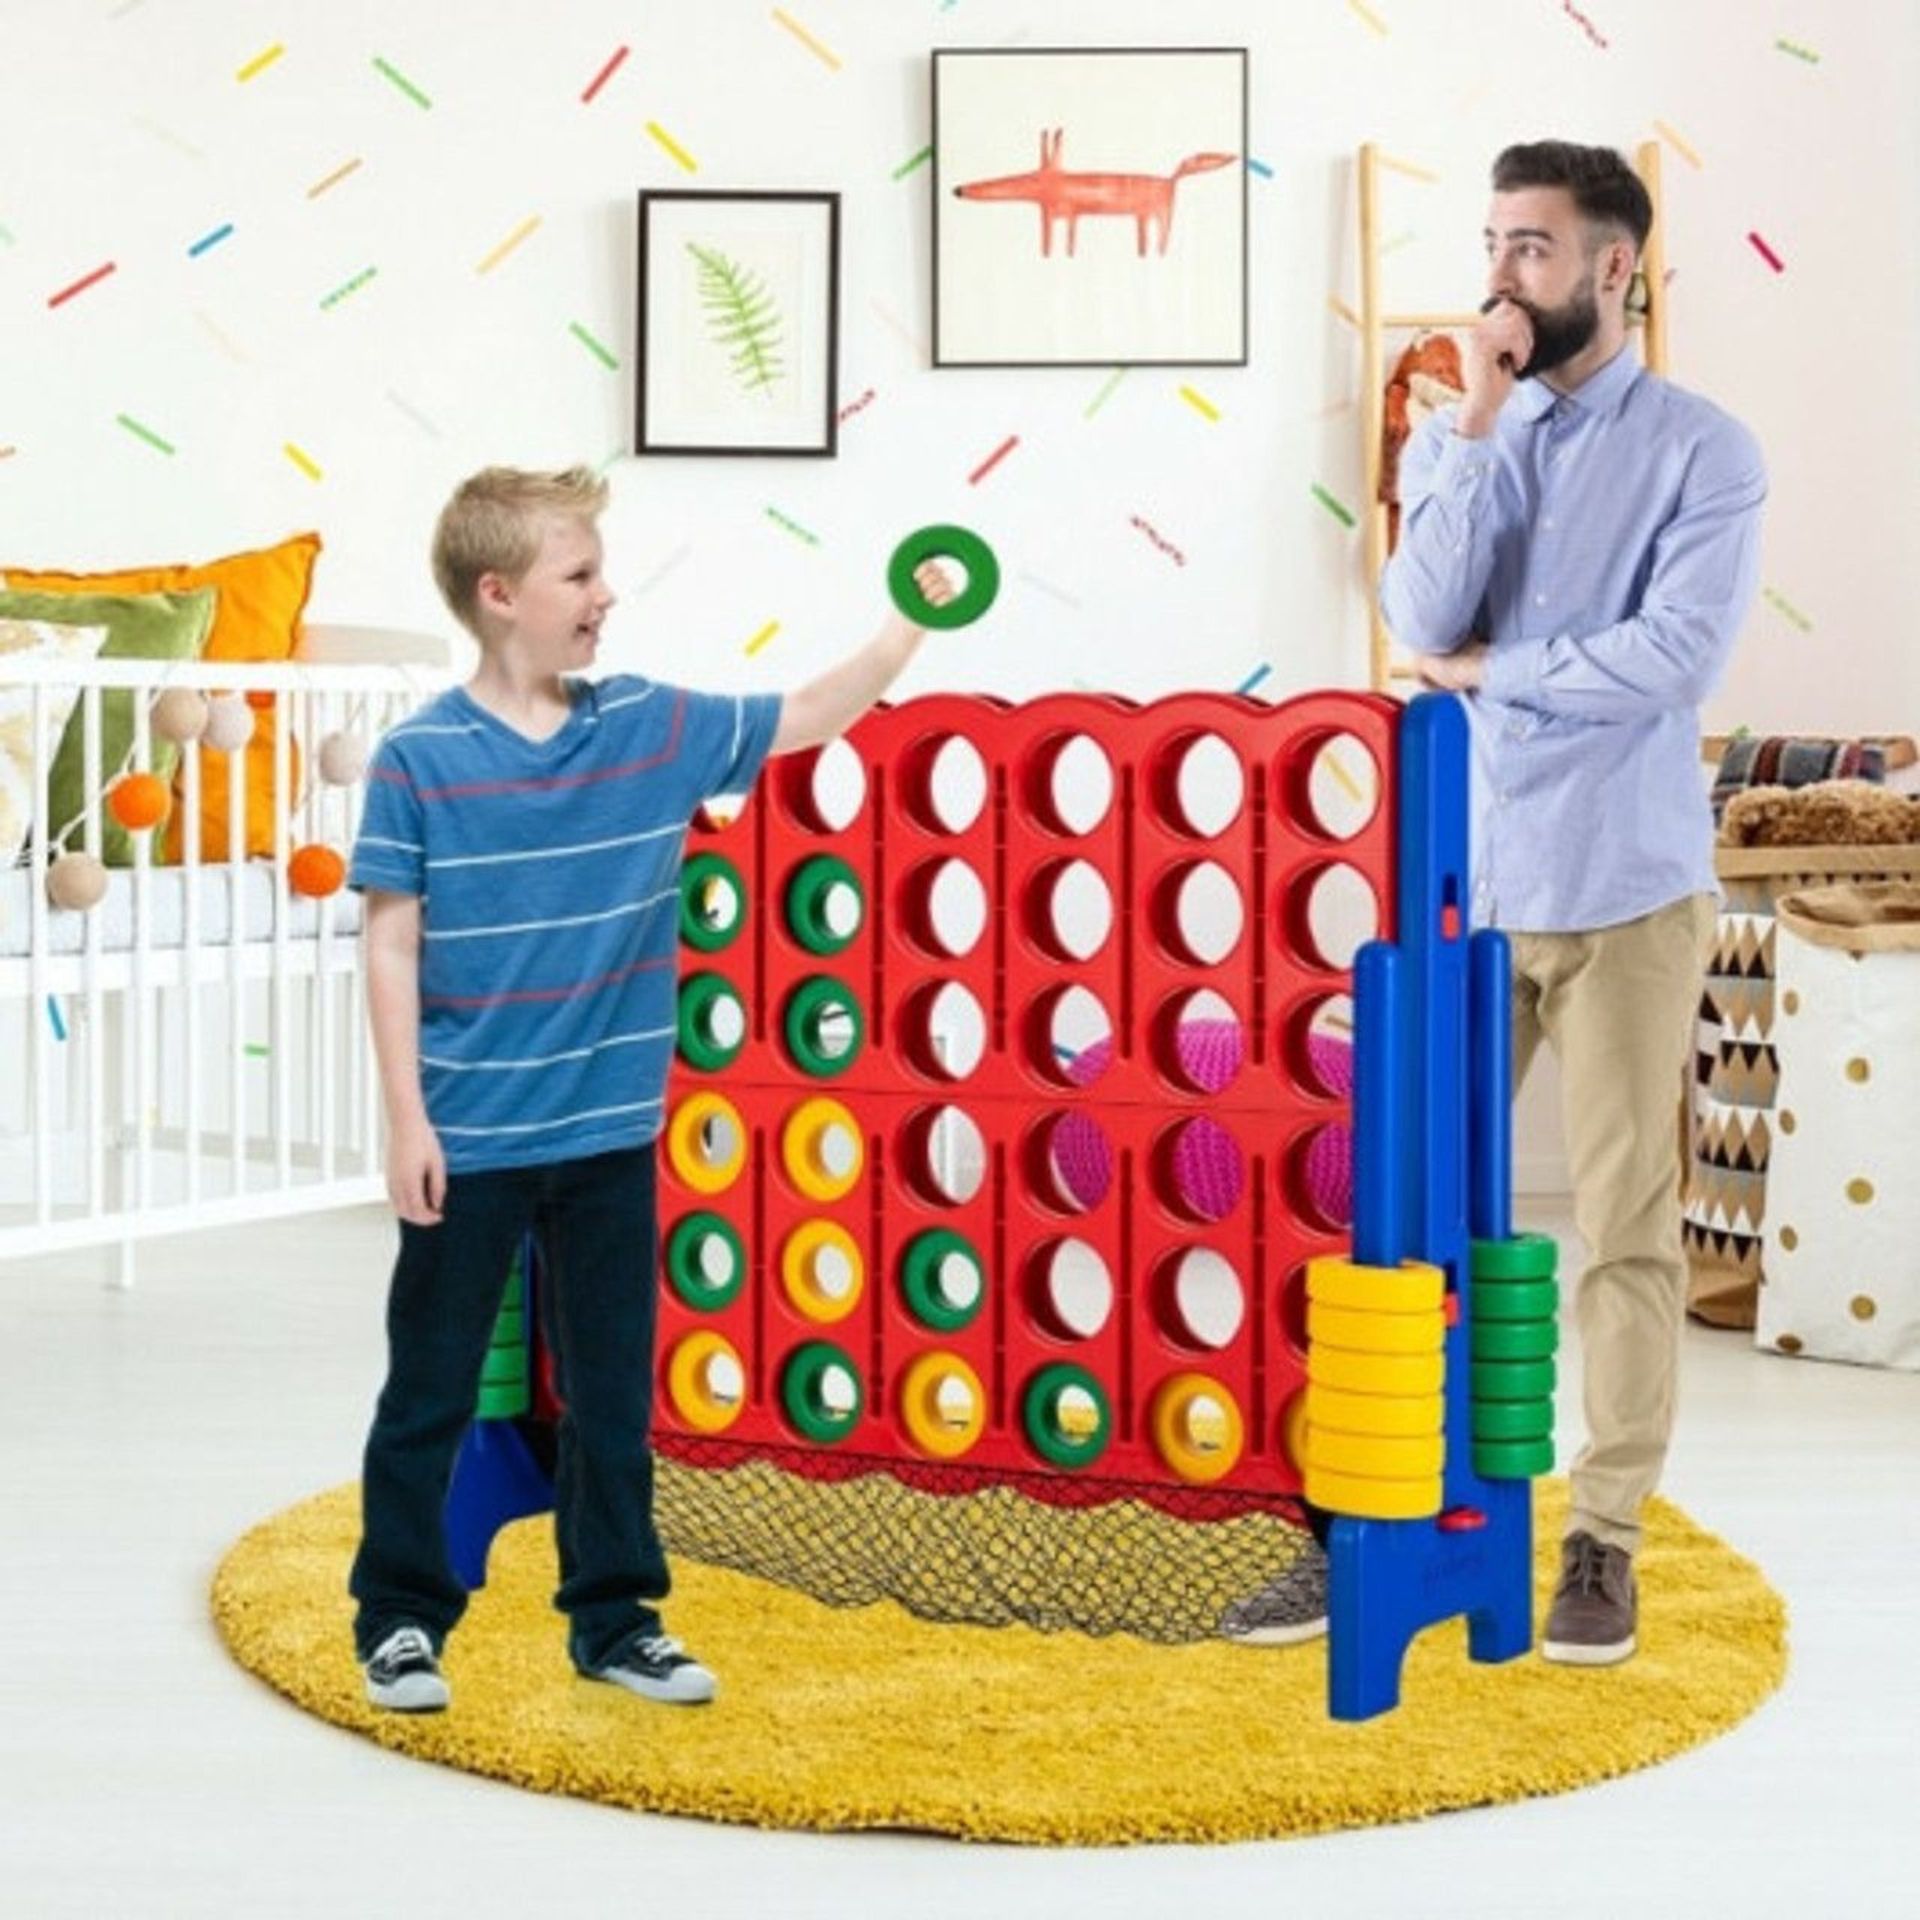 4-To-Score Giant Game Set With Net Storage. - ER26.